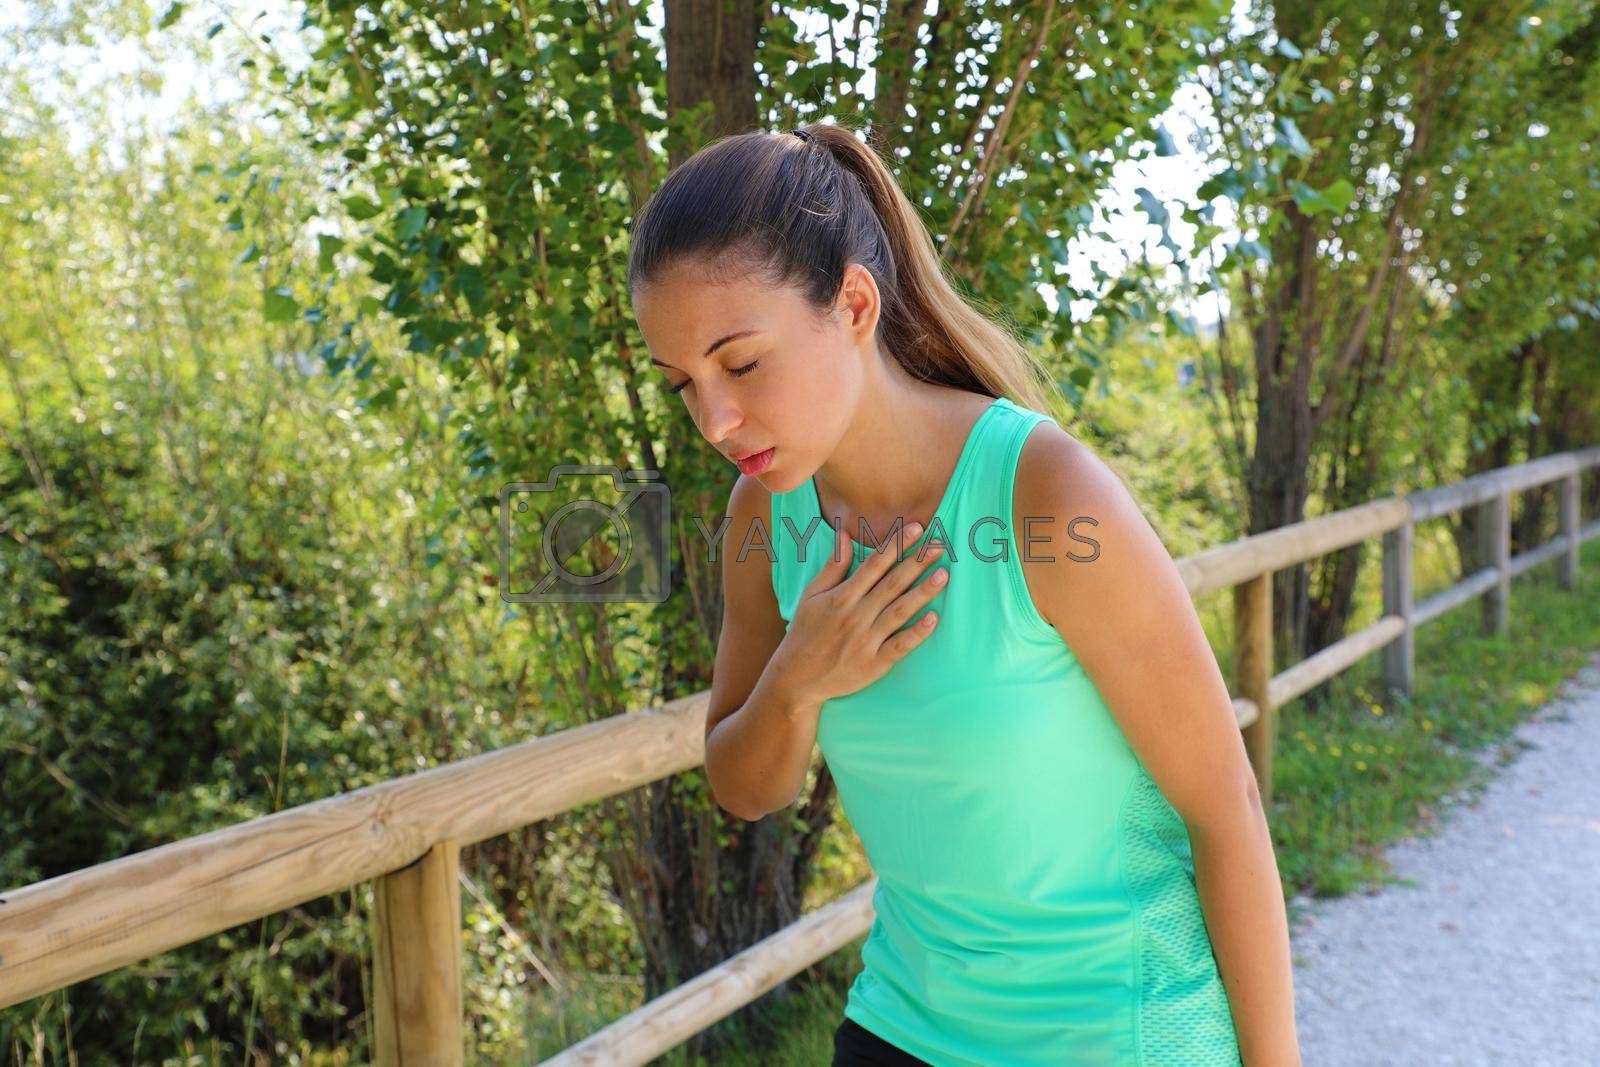 Royalty free image of Running nausea. Nauseous and sick ill runner vomiting. Running woman feeling bad about to throw up. Girl having nausea from dehydration or chest pain. by sergio_monti